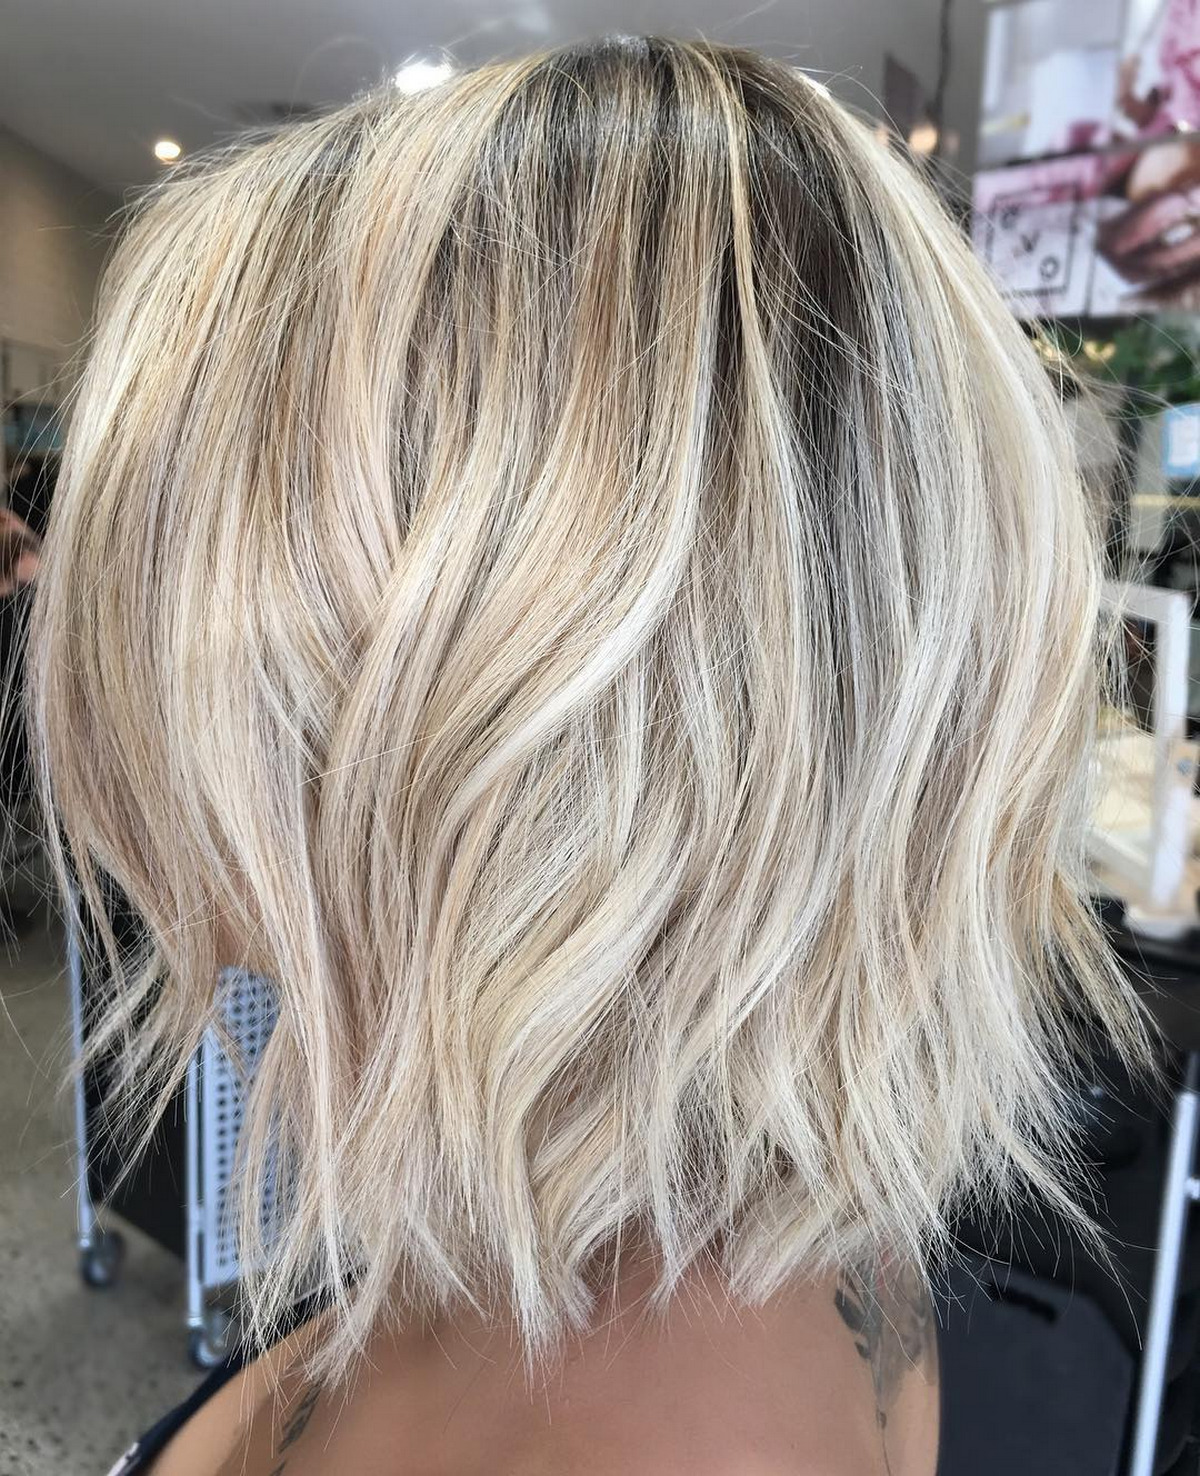 Bright Blonde Bob With Shaggy Ends